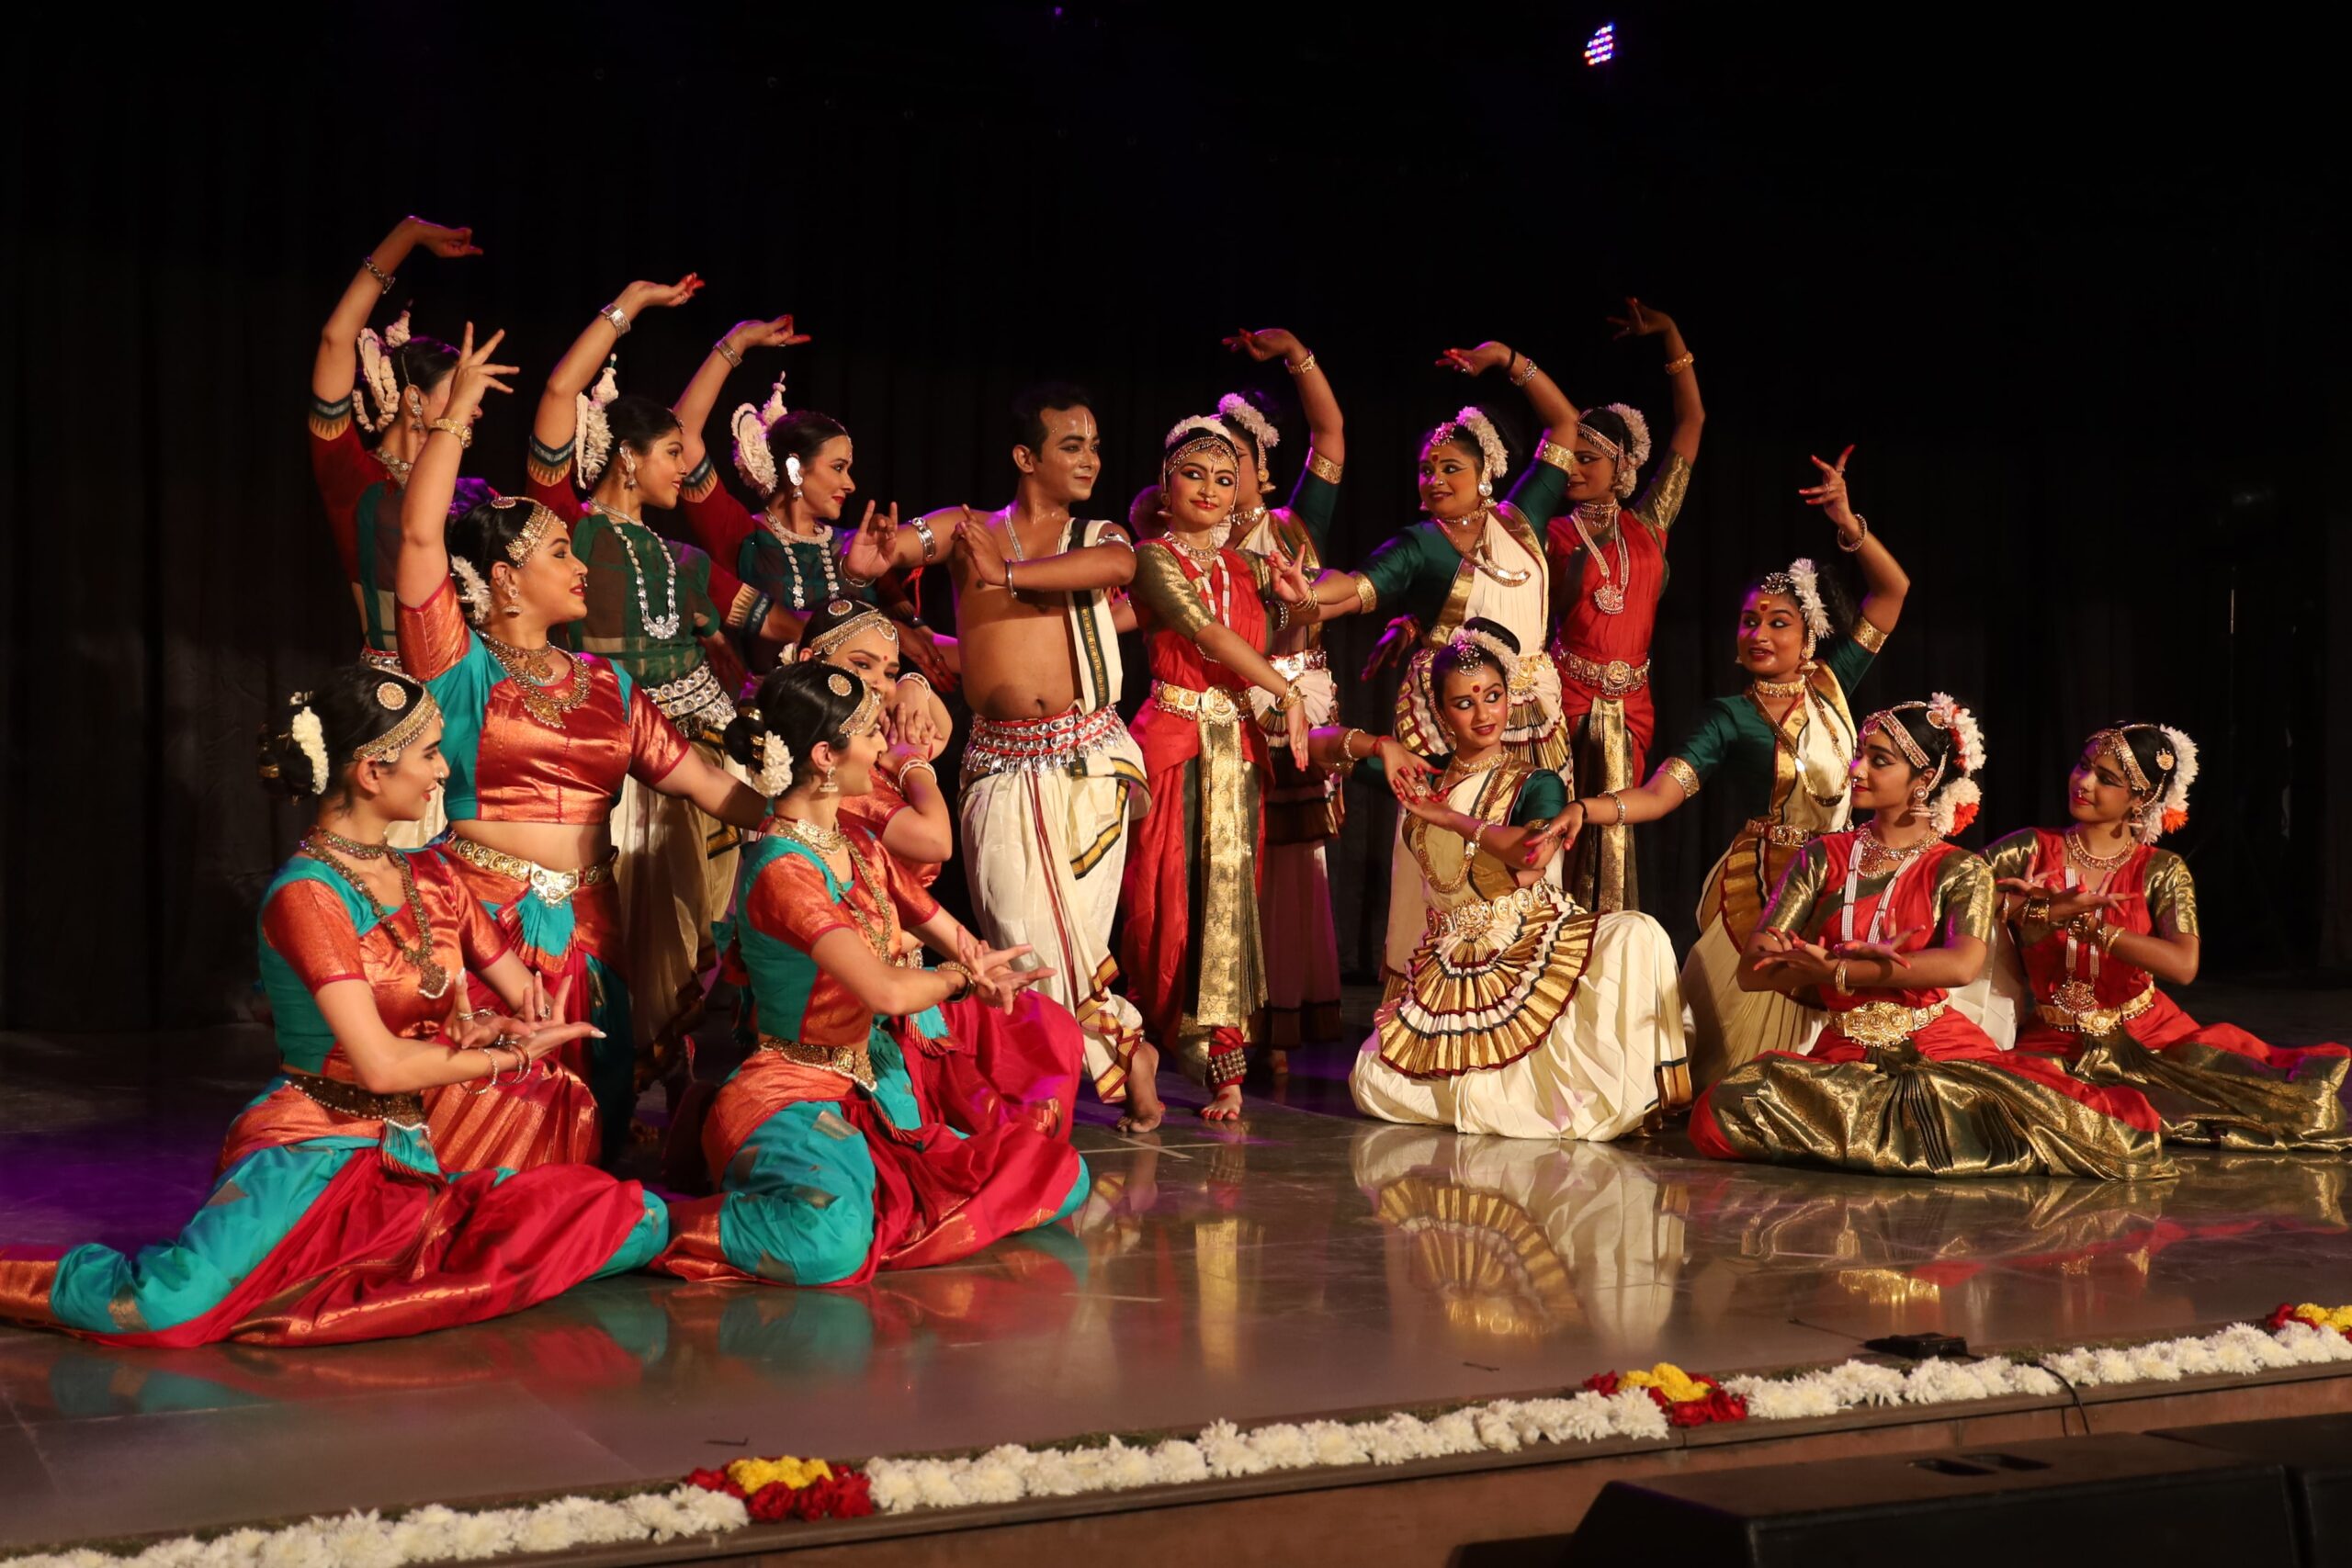 Parampara series returns: A festival of dance and music